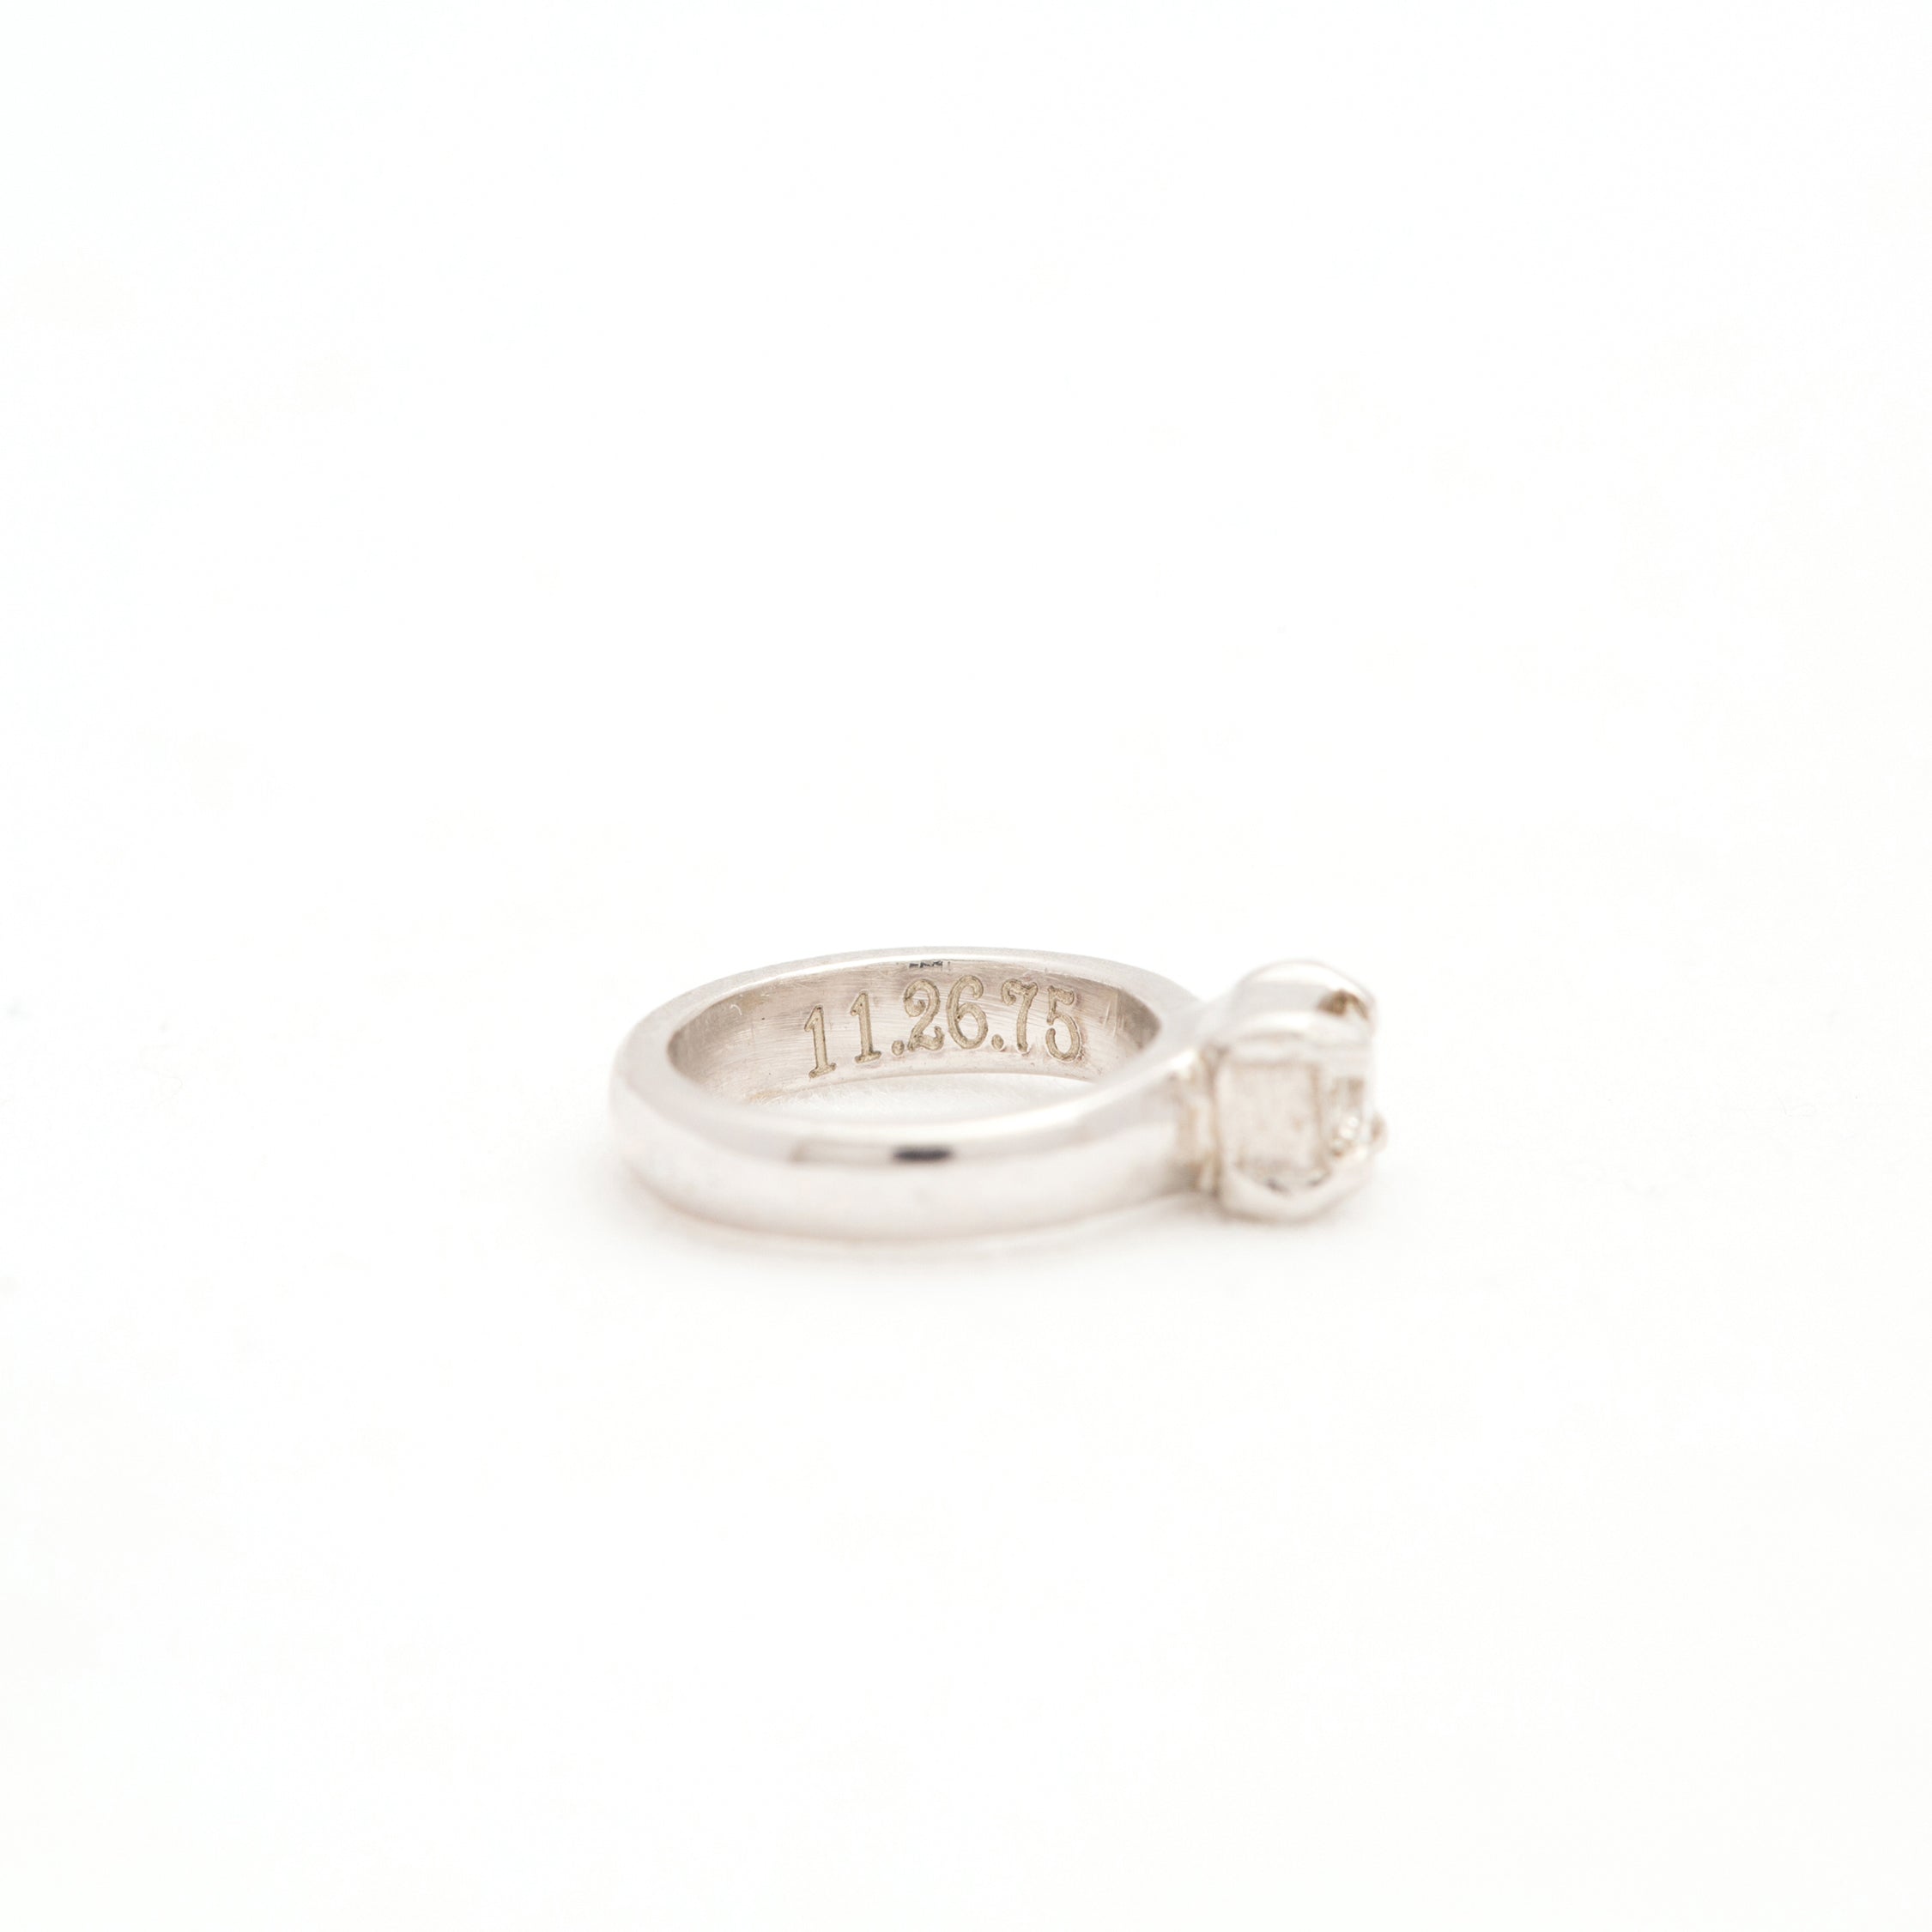 The F&B White Gold Birthstone Mini Ring Necklace